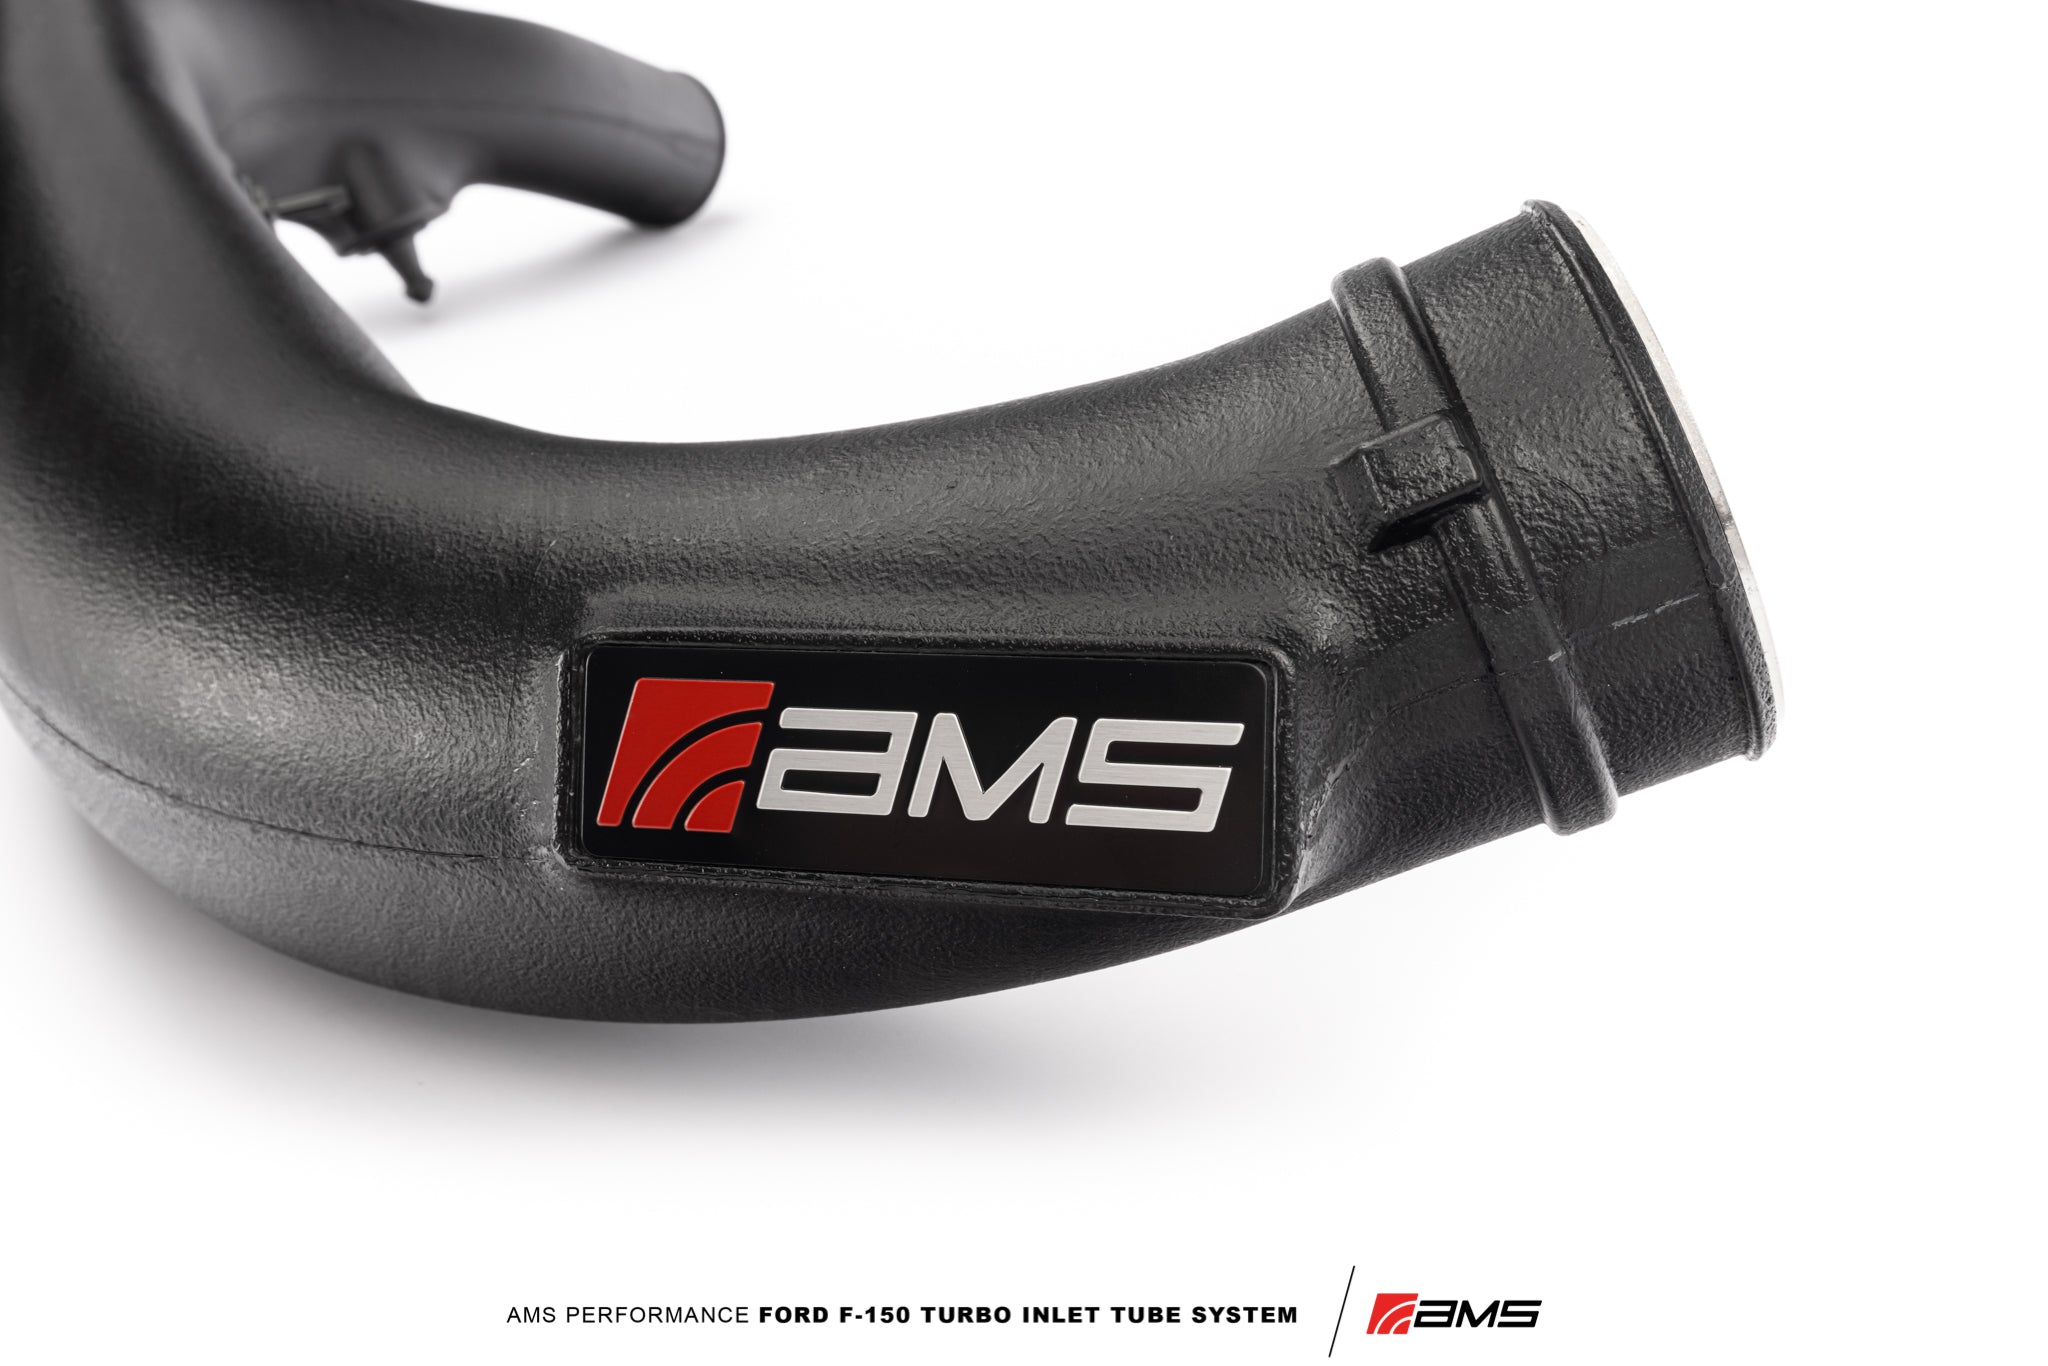 AMS PERFORMANCE 2015-2016 FORD F-150 3.5L ECOBOOST TURBO INLET TUBES